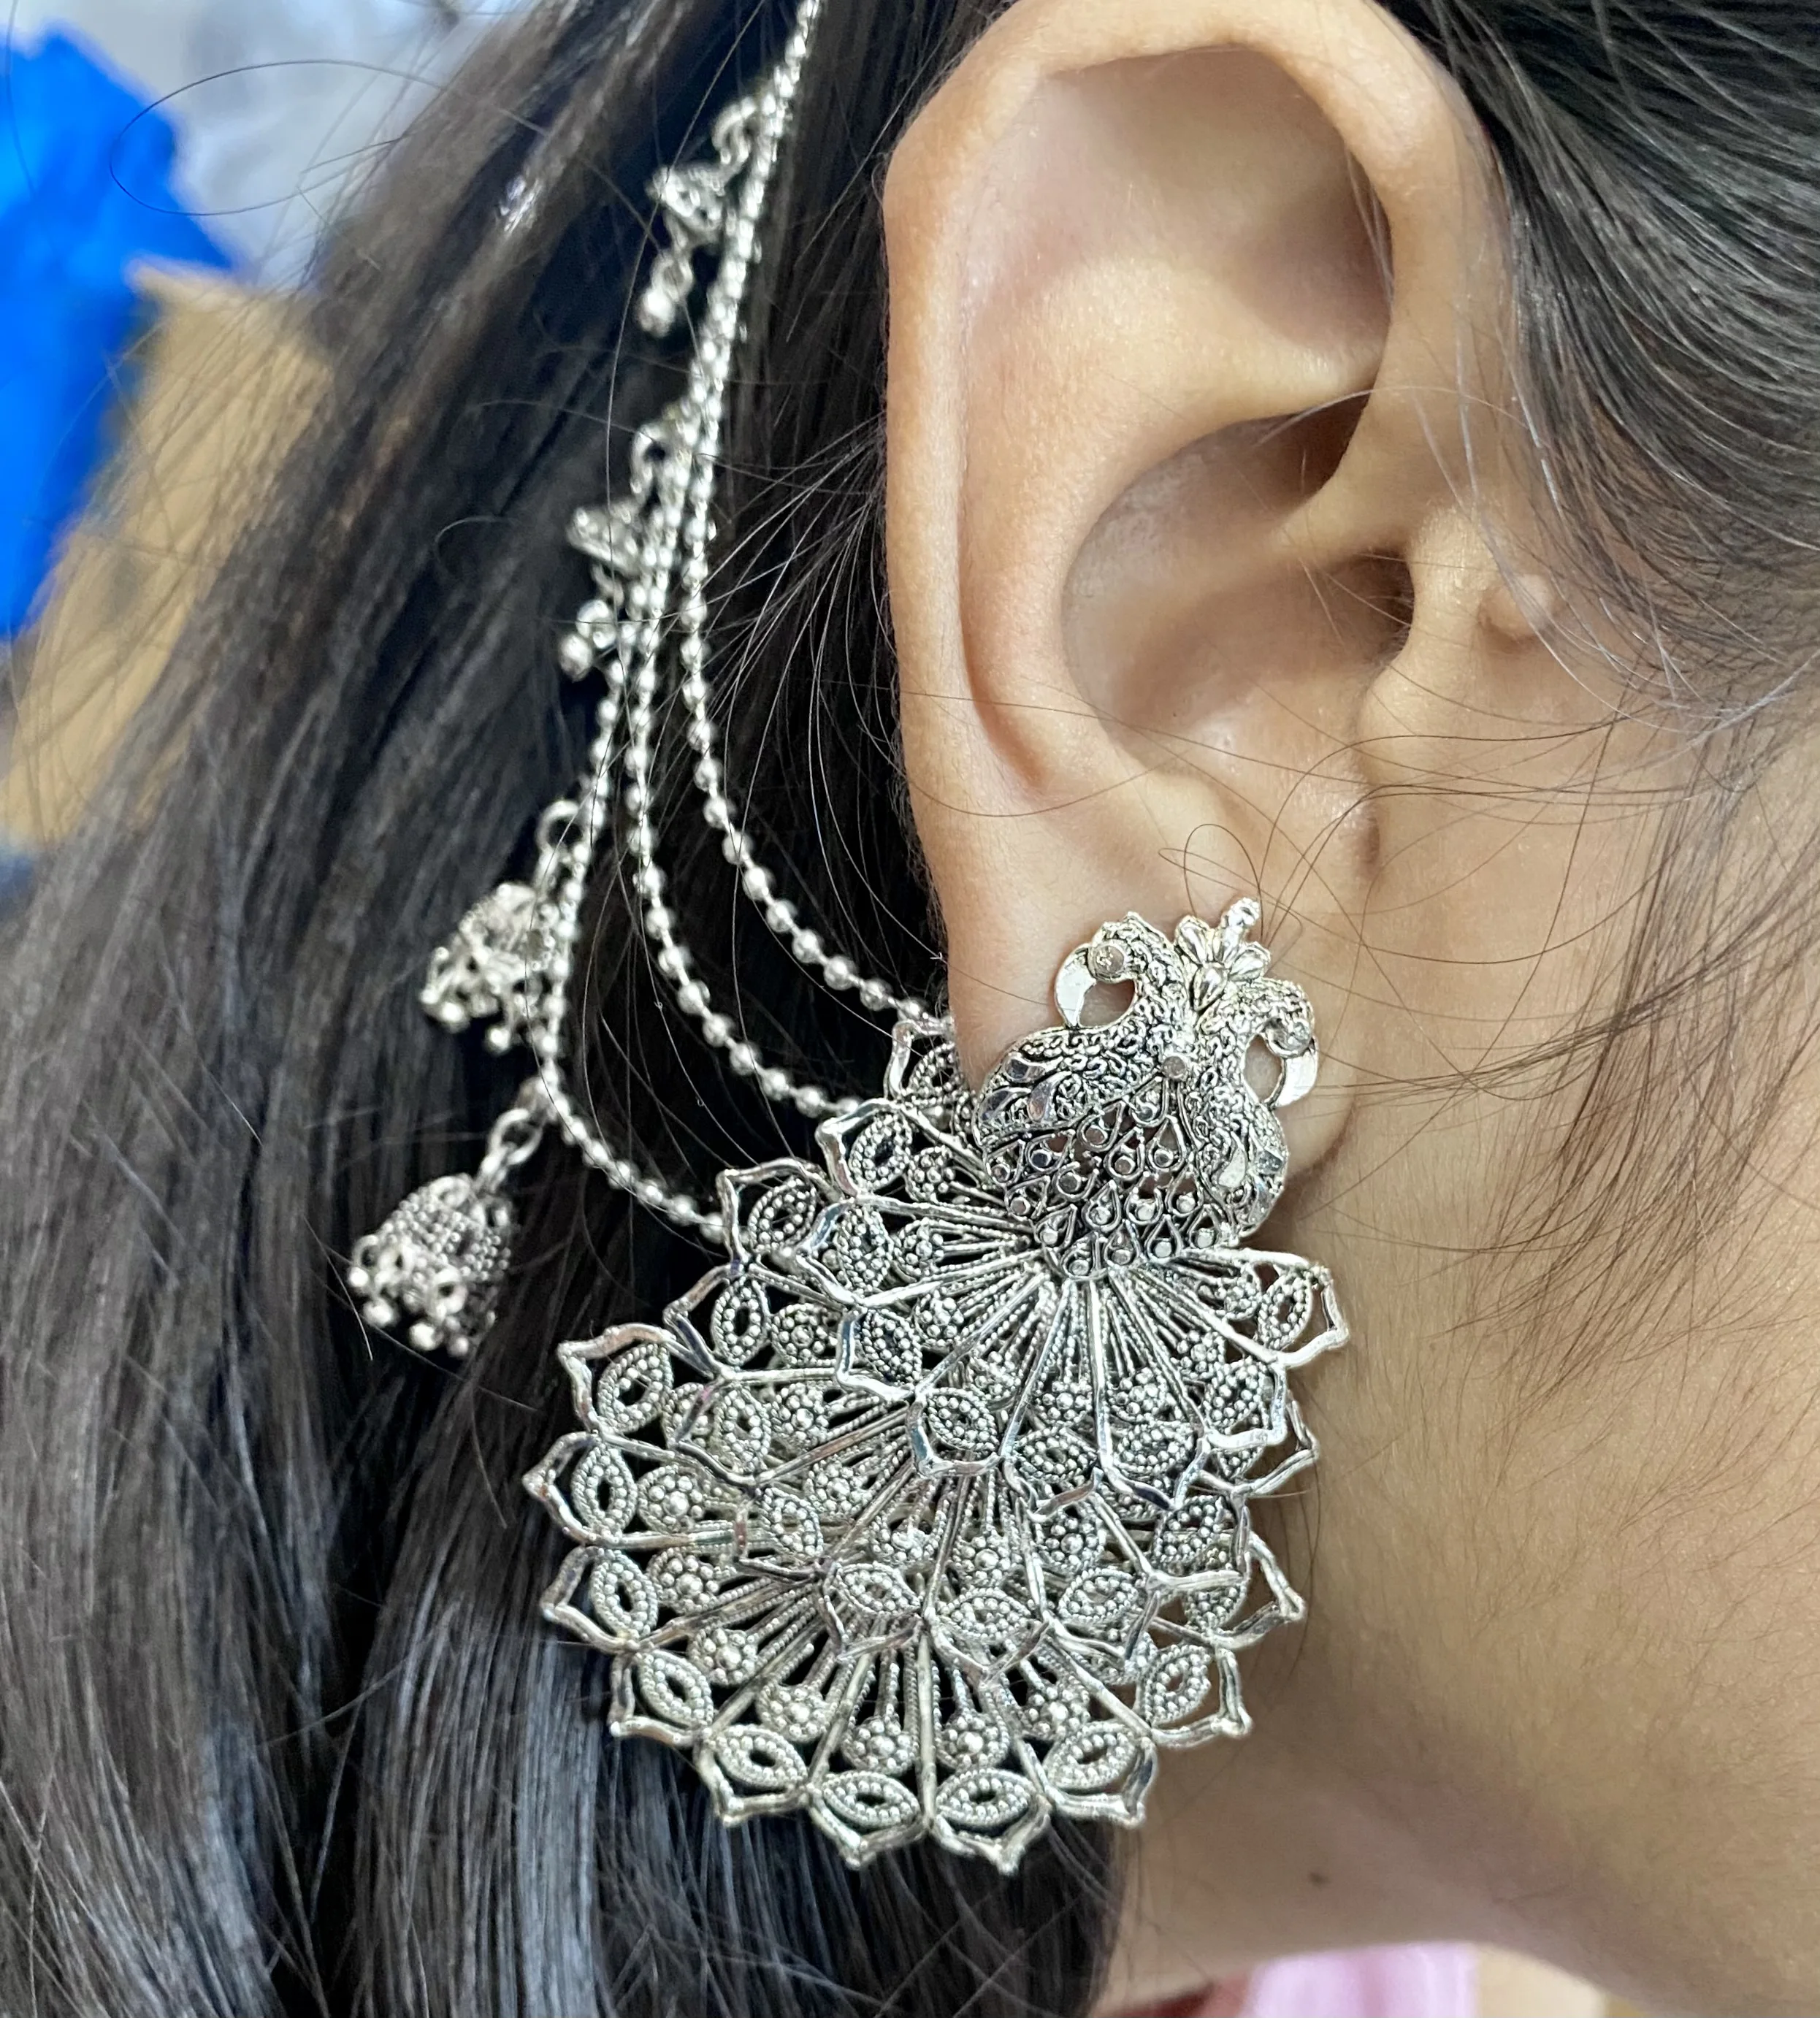 Silver Plated Full Ear Peacock Earrings For Women And Girls And Is So Easy  To Setup Hair For Wedding And Special Occasions - Buy Peacock Earrings,Full  Ear Earrings For Women And Girls,Bahubali